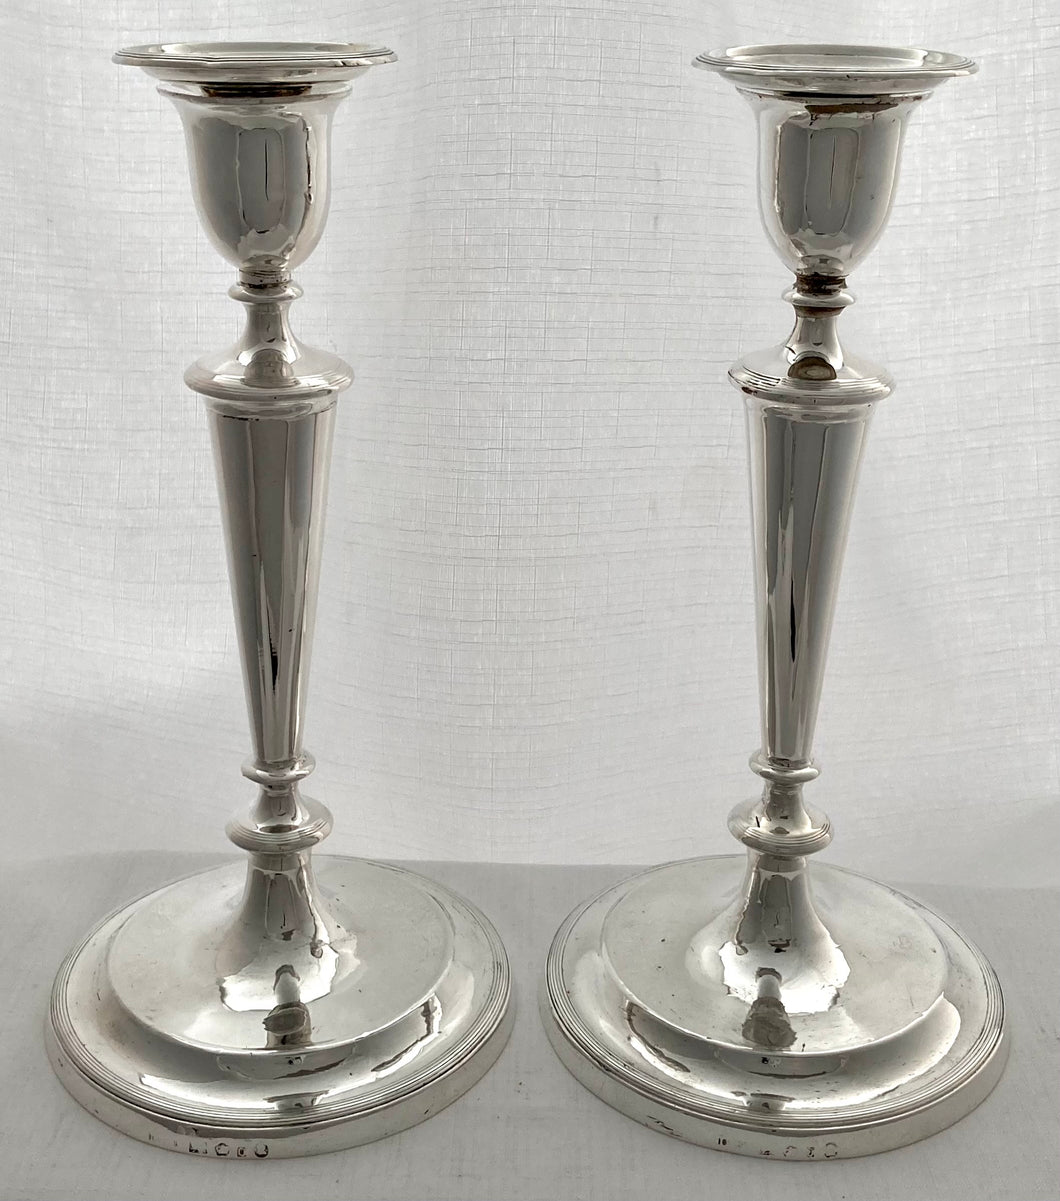 Georgian, George III, Pair of Crested Silver Candlesticks. Sheffield 1793 John Parsons & Co.